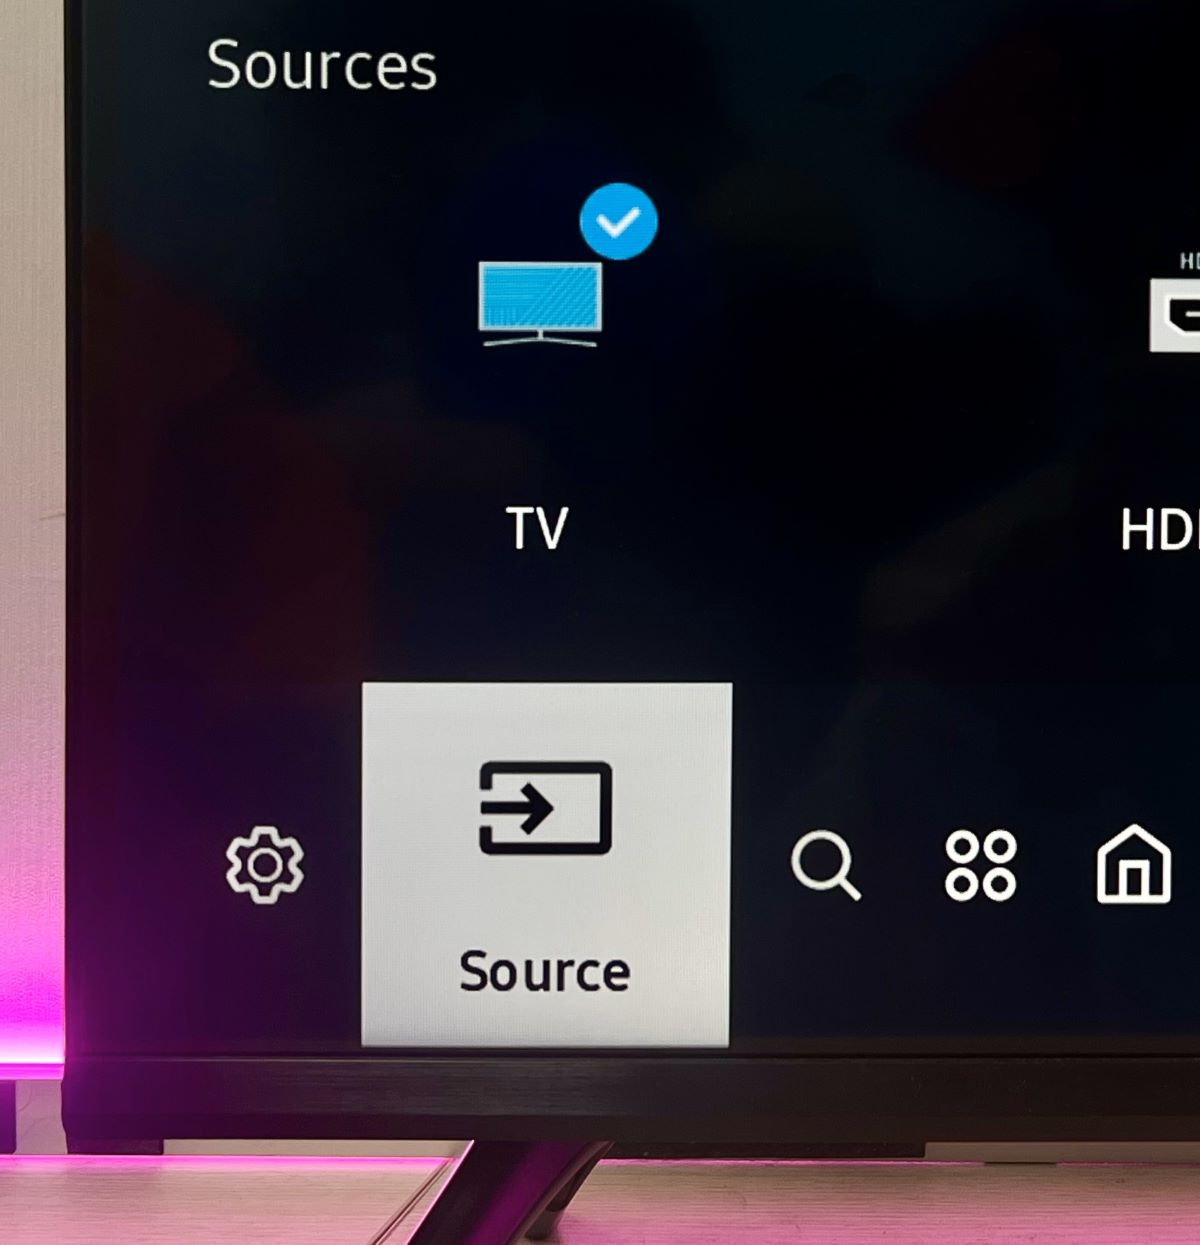 source option is highlighted on a samsung tv